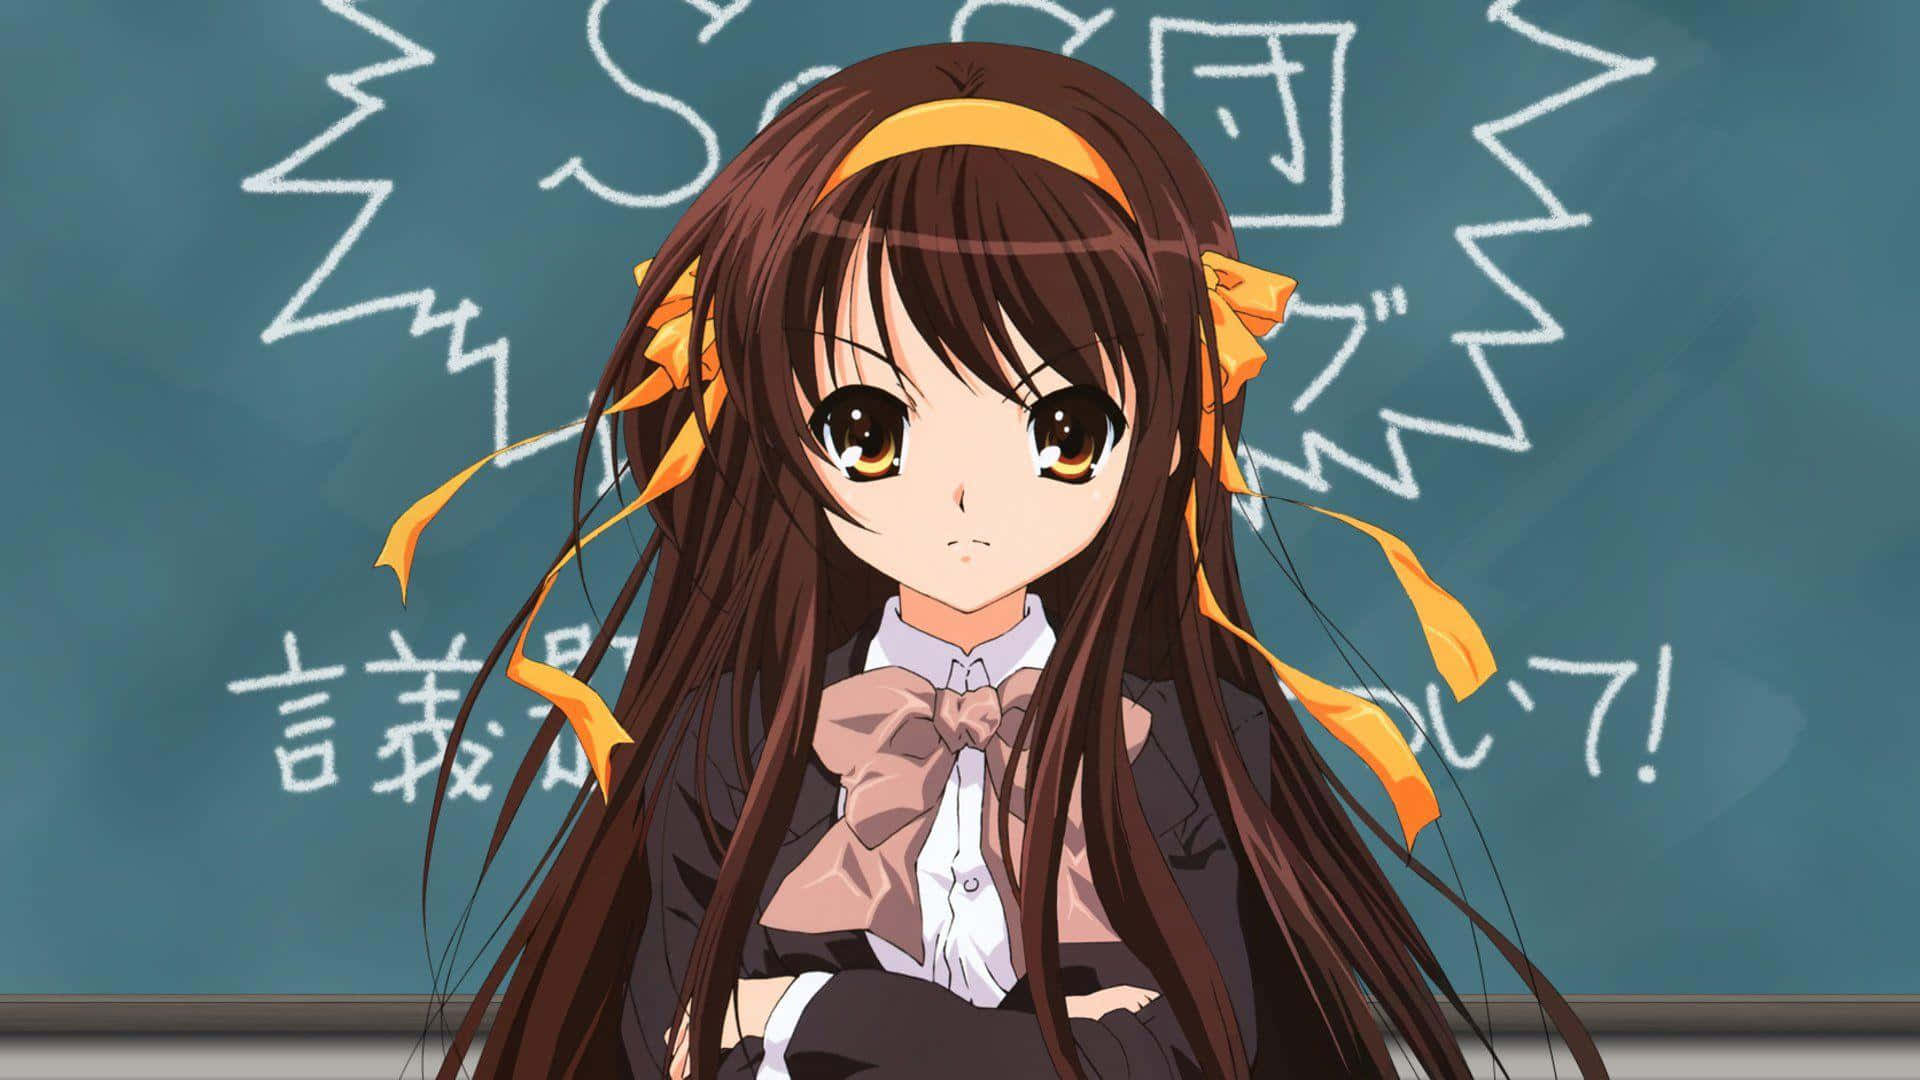 Caption: The Enthusiastic Haruhi Suzumiya with a playful smile Wallpaper